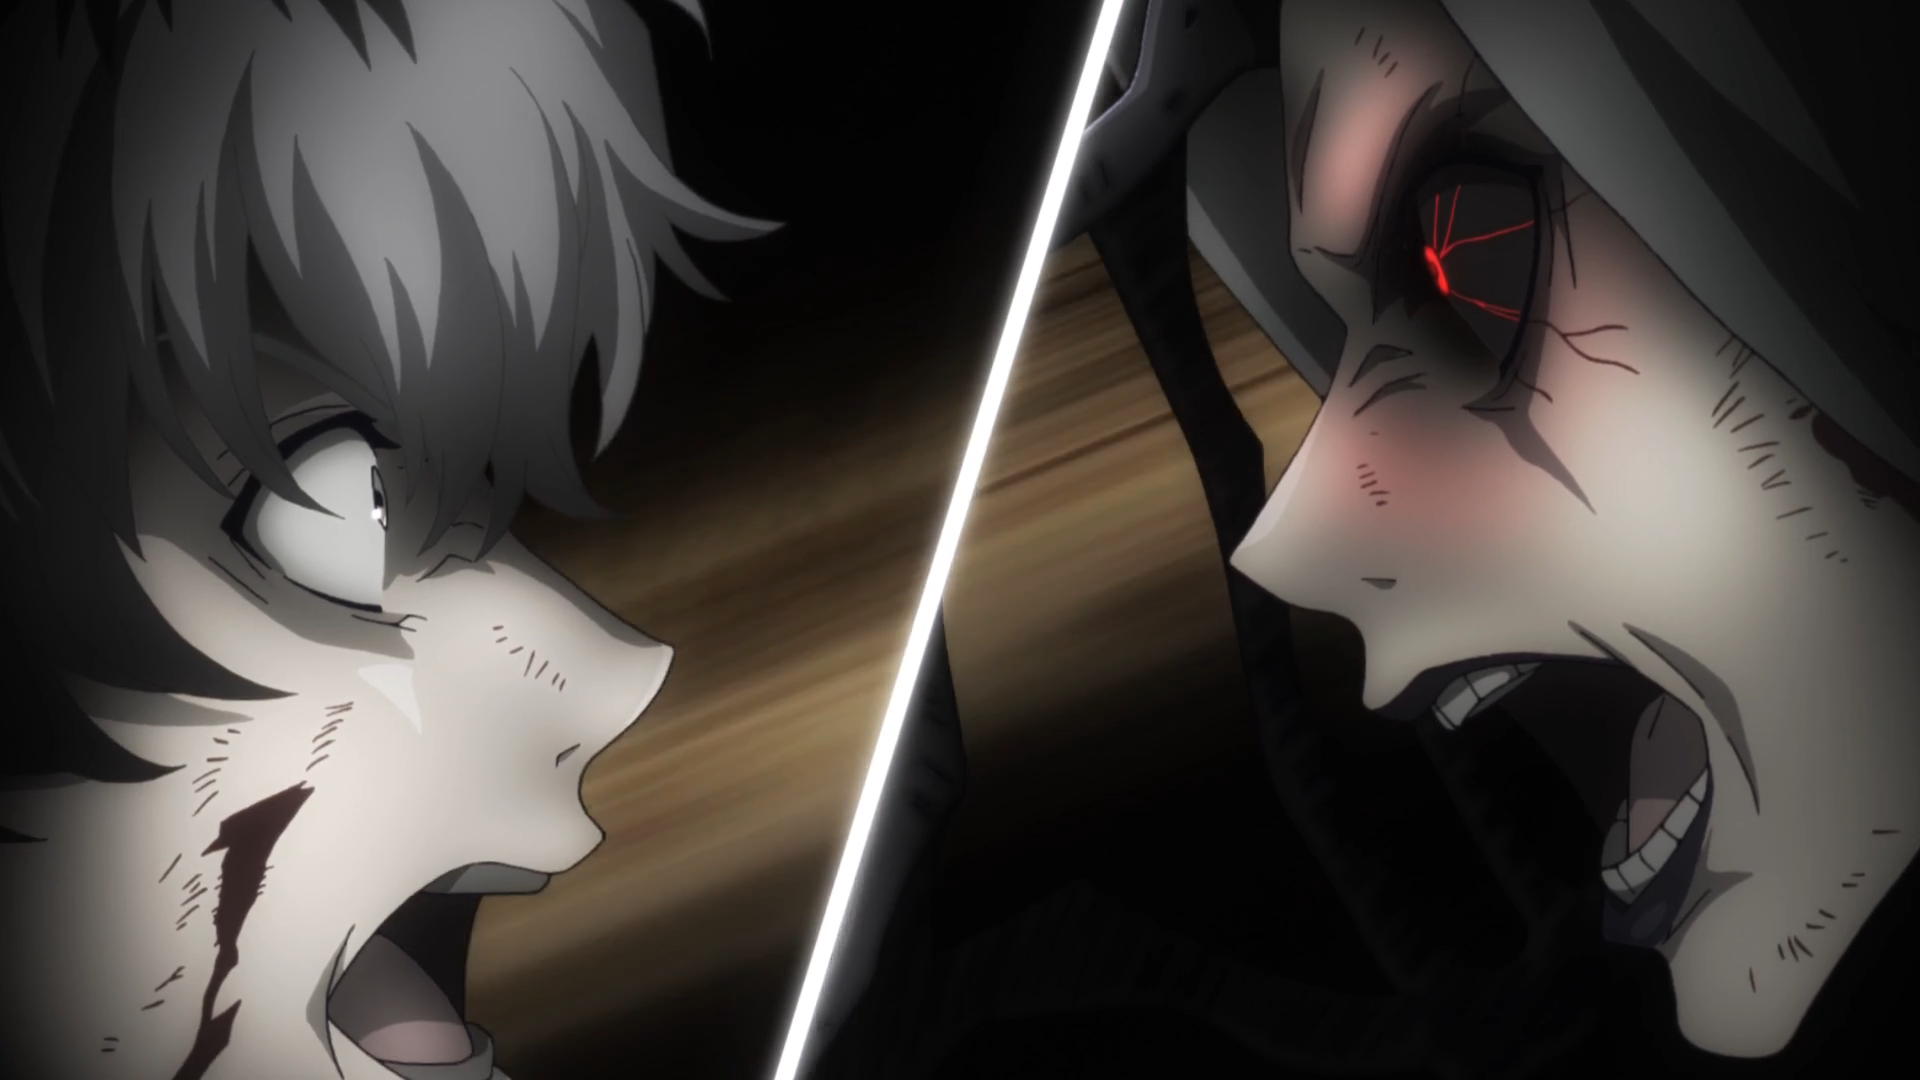 Anime Tokyo Ghoul Picture